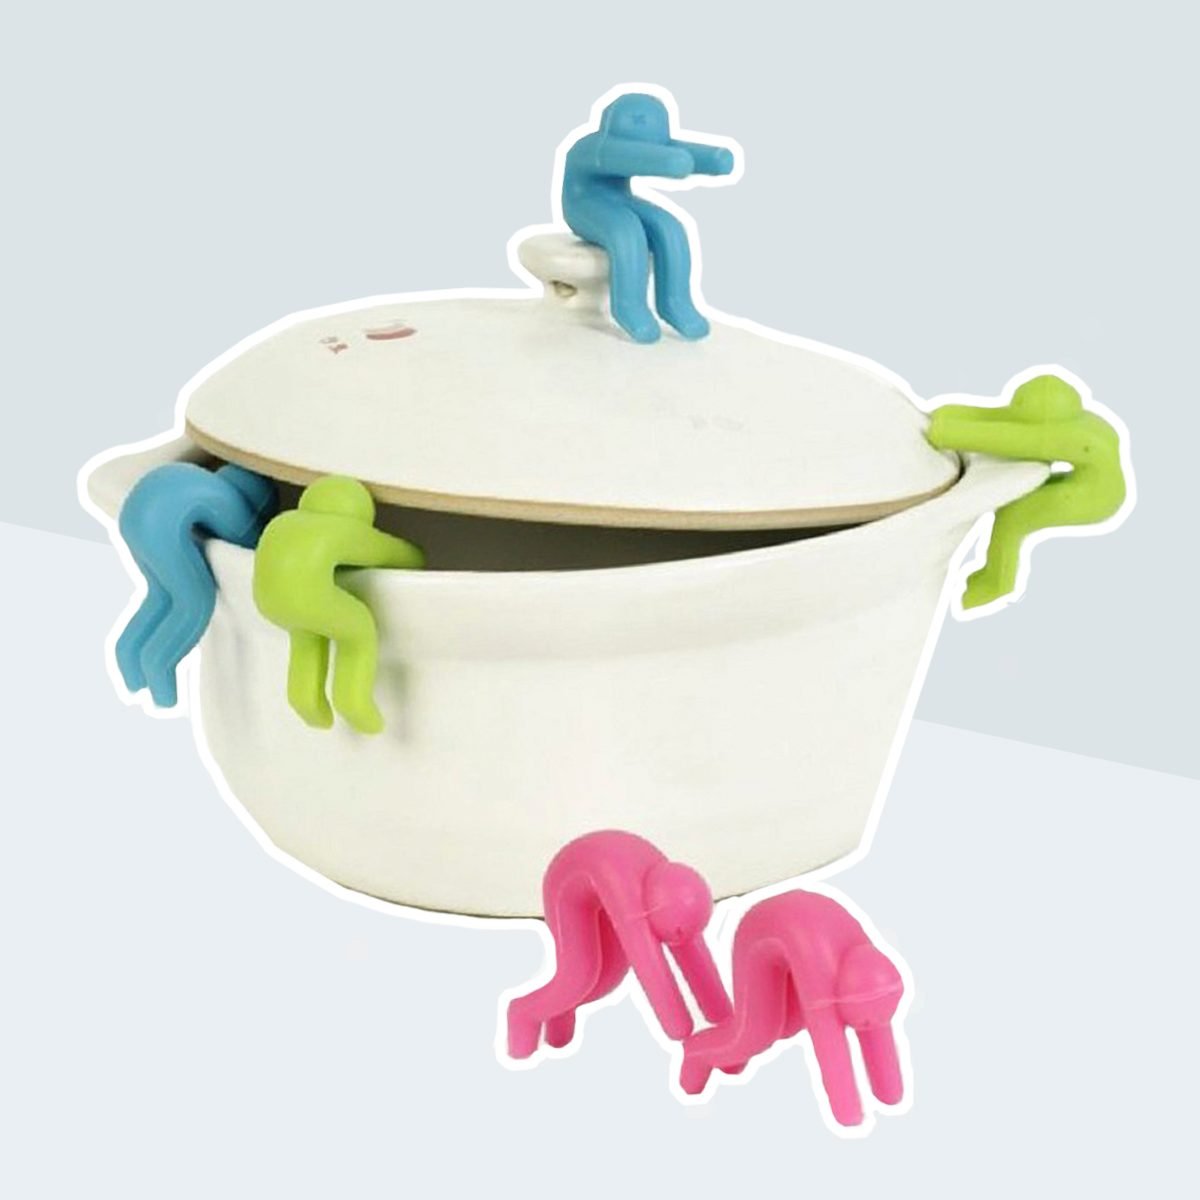 Quirky Cooking: 15 Kitchen Accessories That Are Just Plain Fun, funny  kitchen utensils